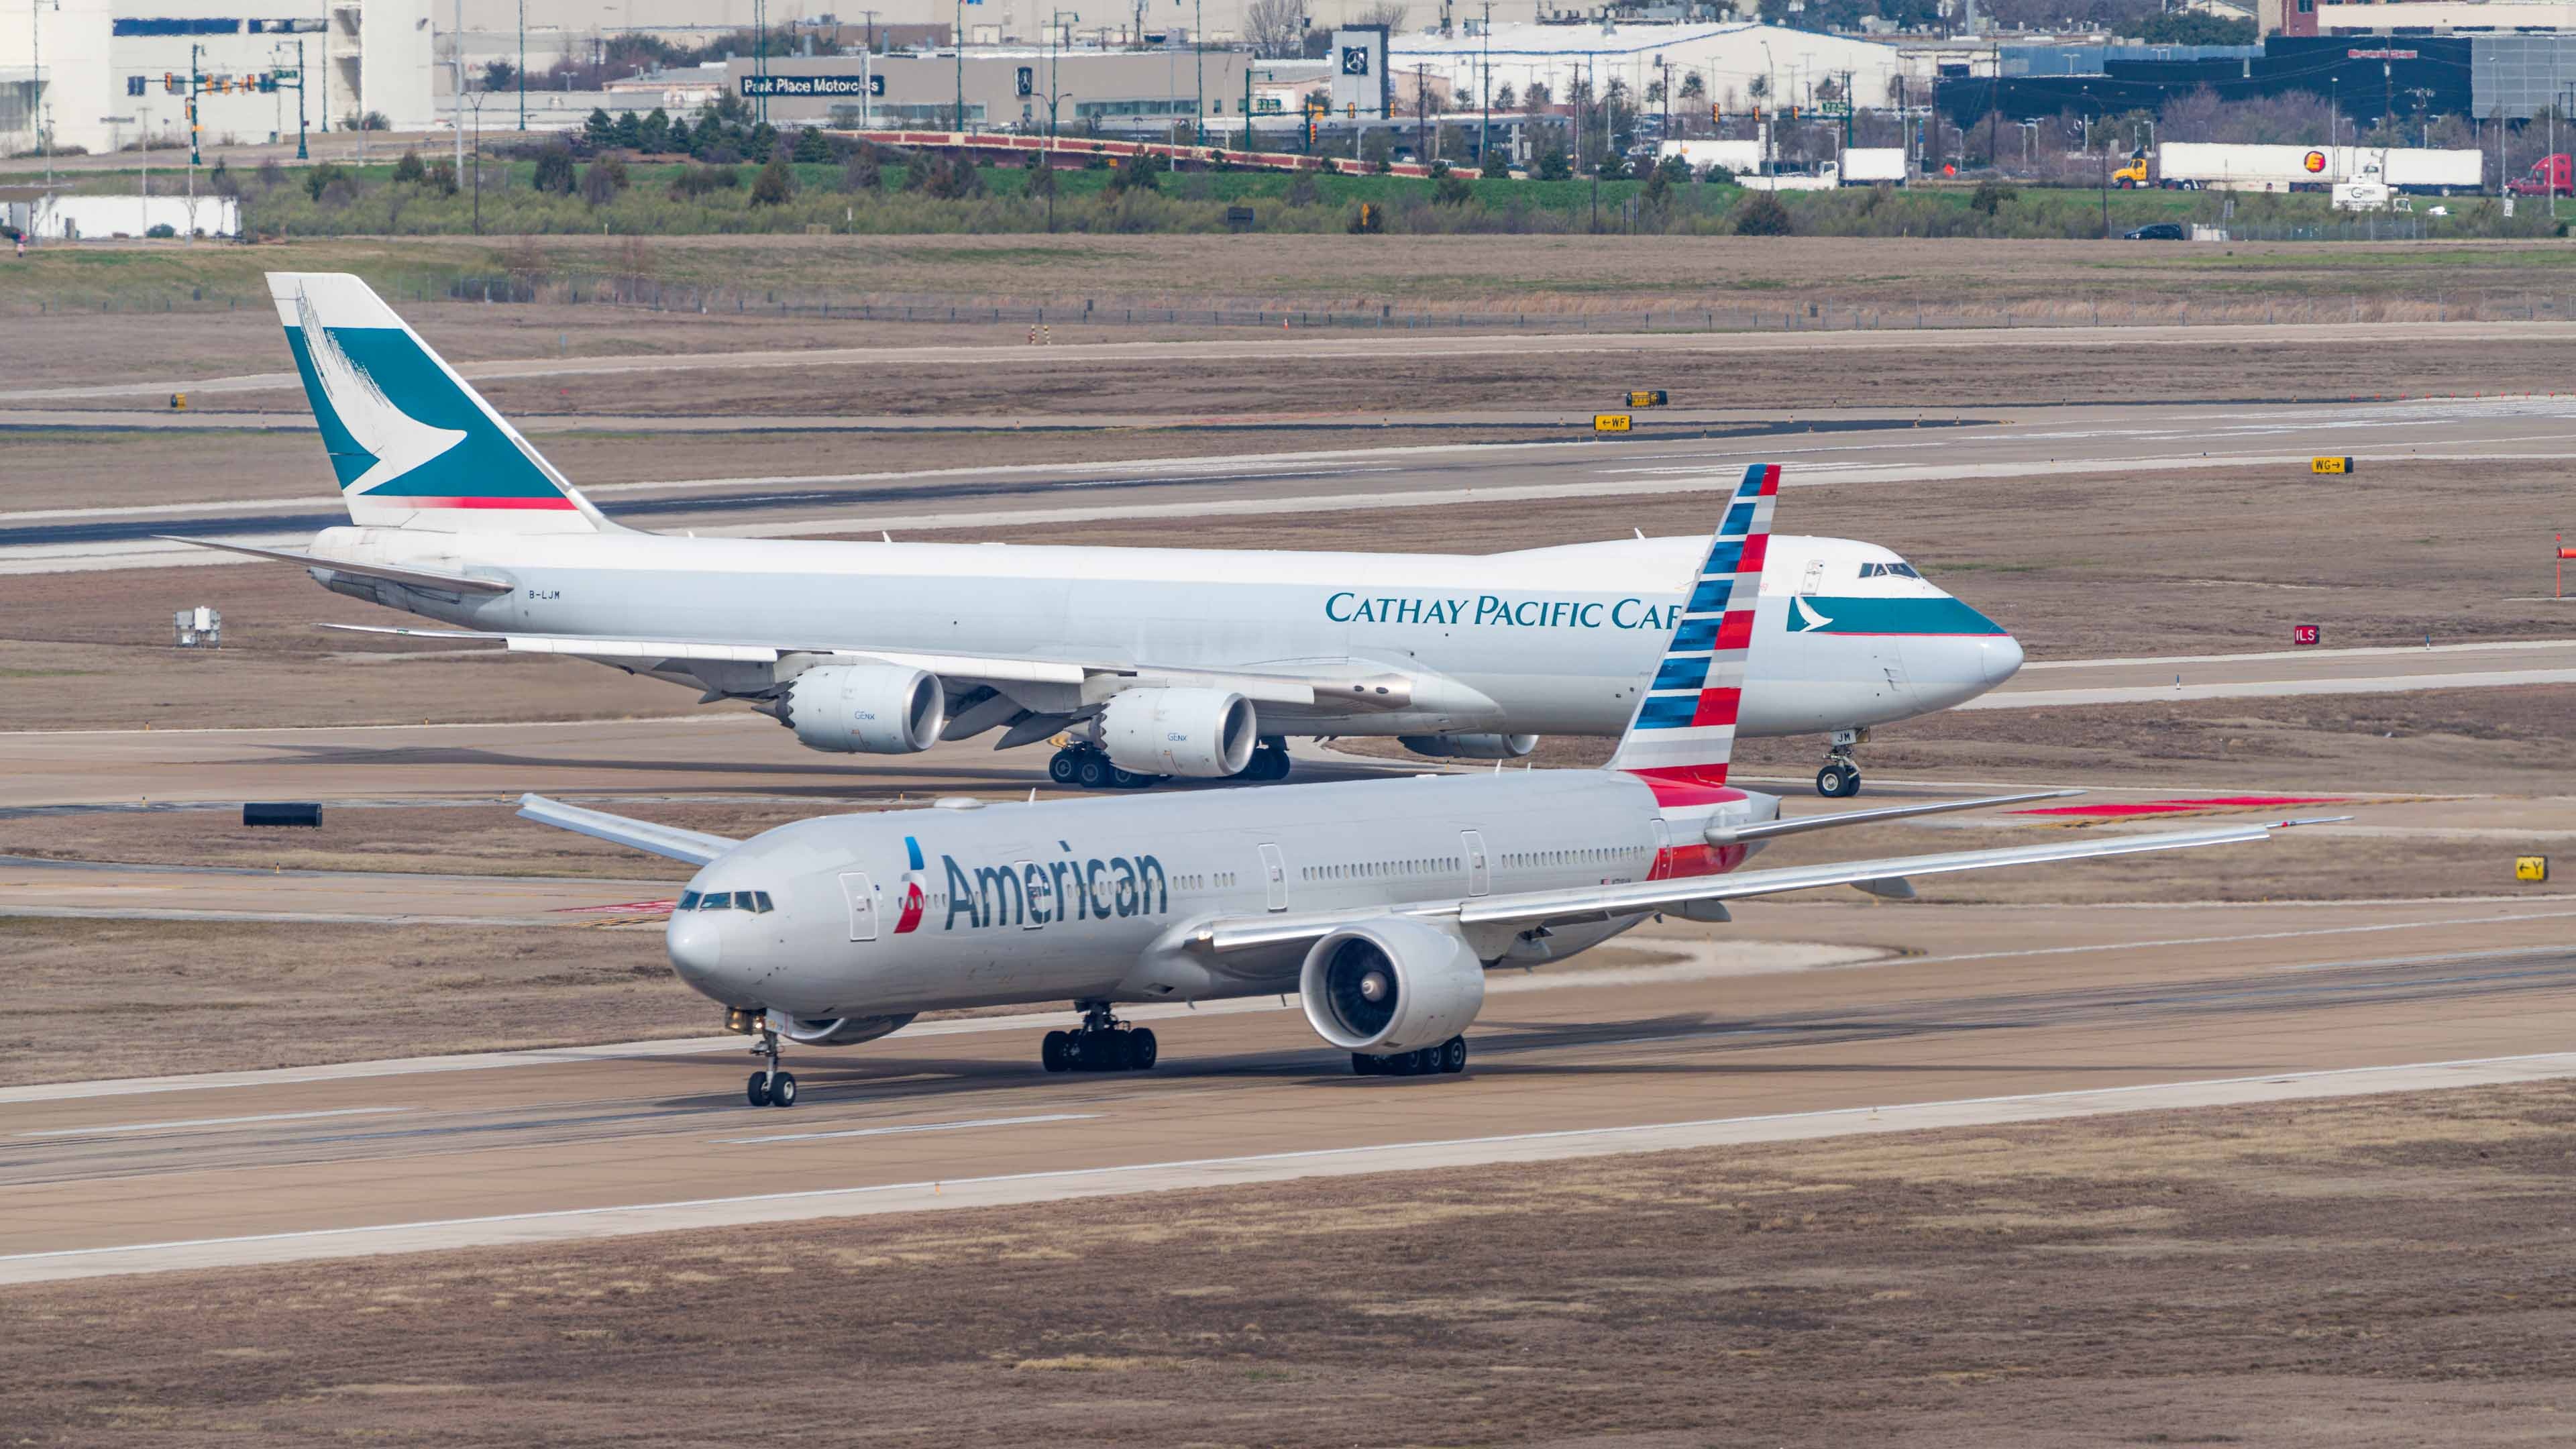 American Airlines, Wallpapers of the week, Desktop and mobile backgrounds, Aviation nostalgia, 3840x2160 4K Desktop